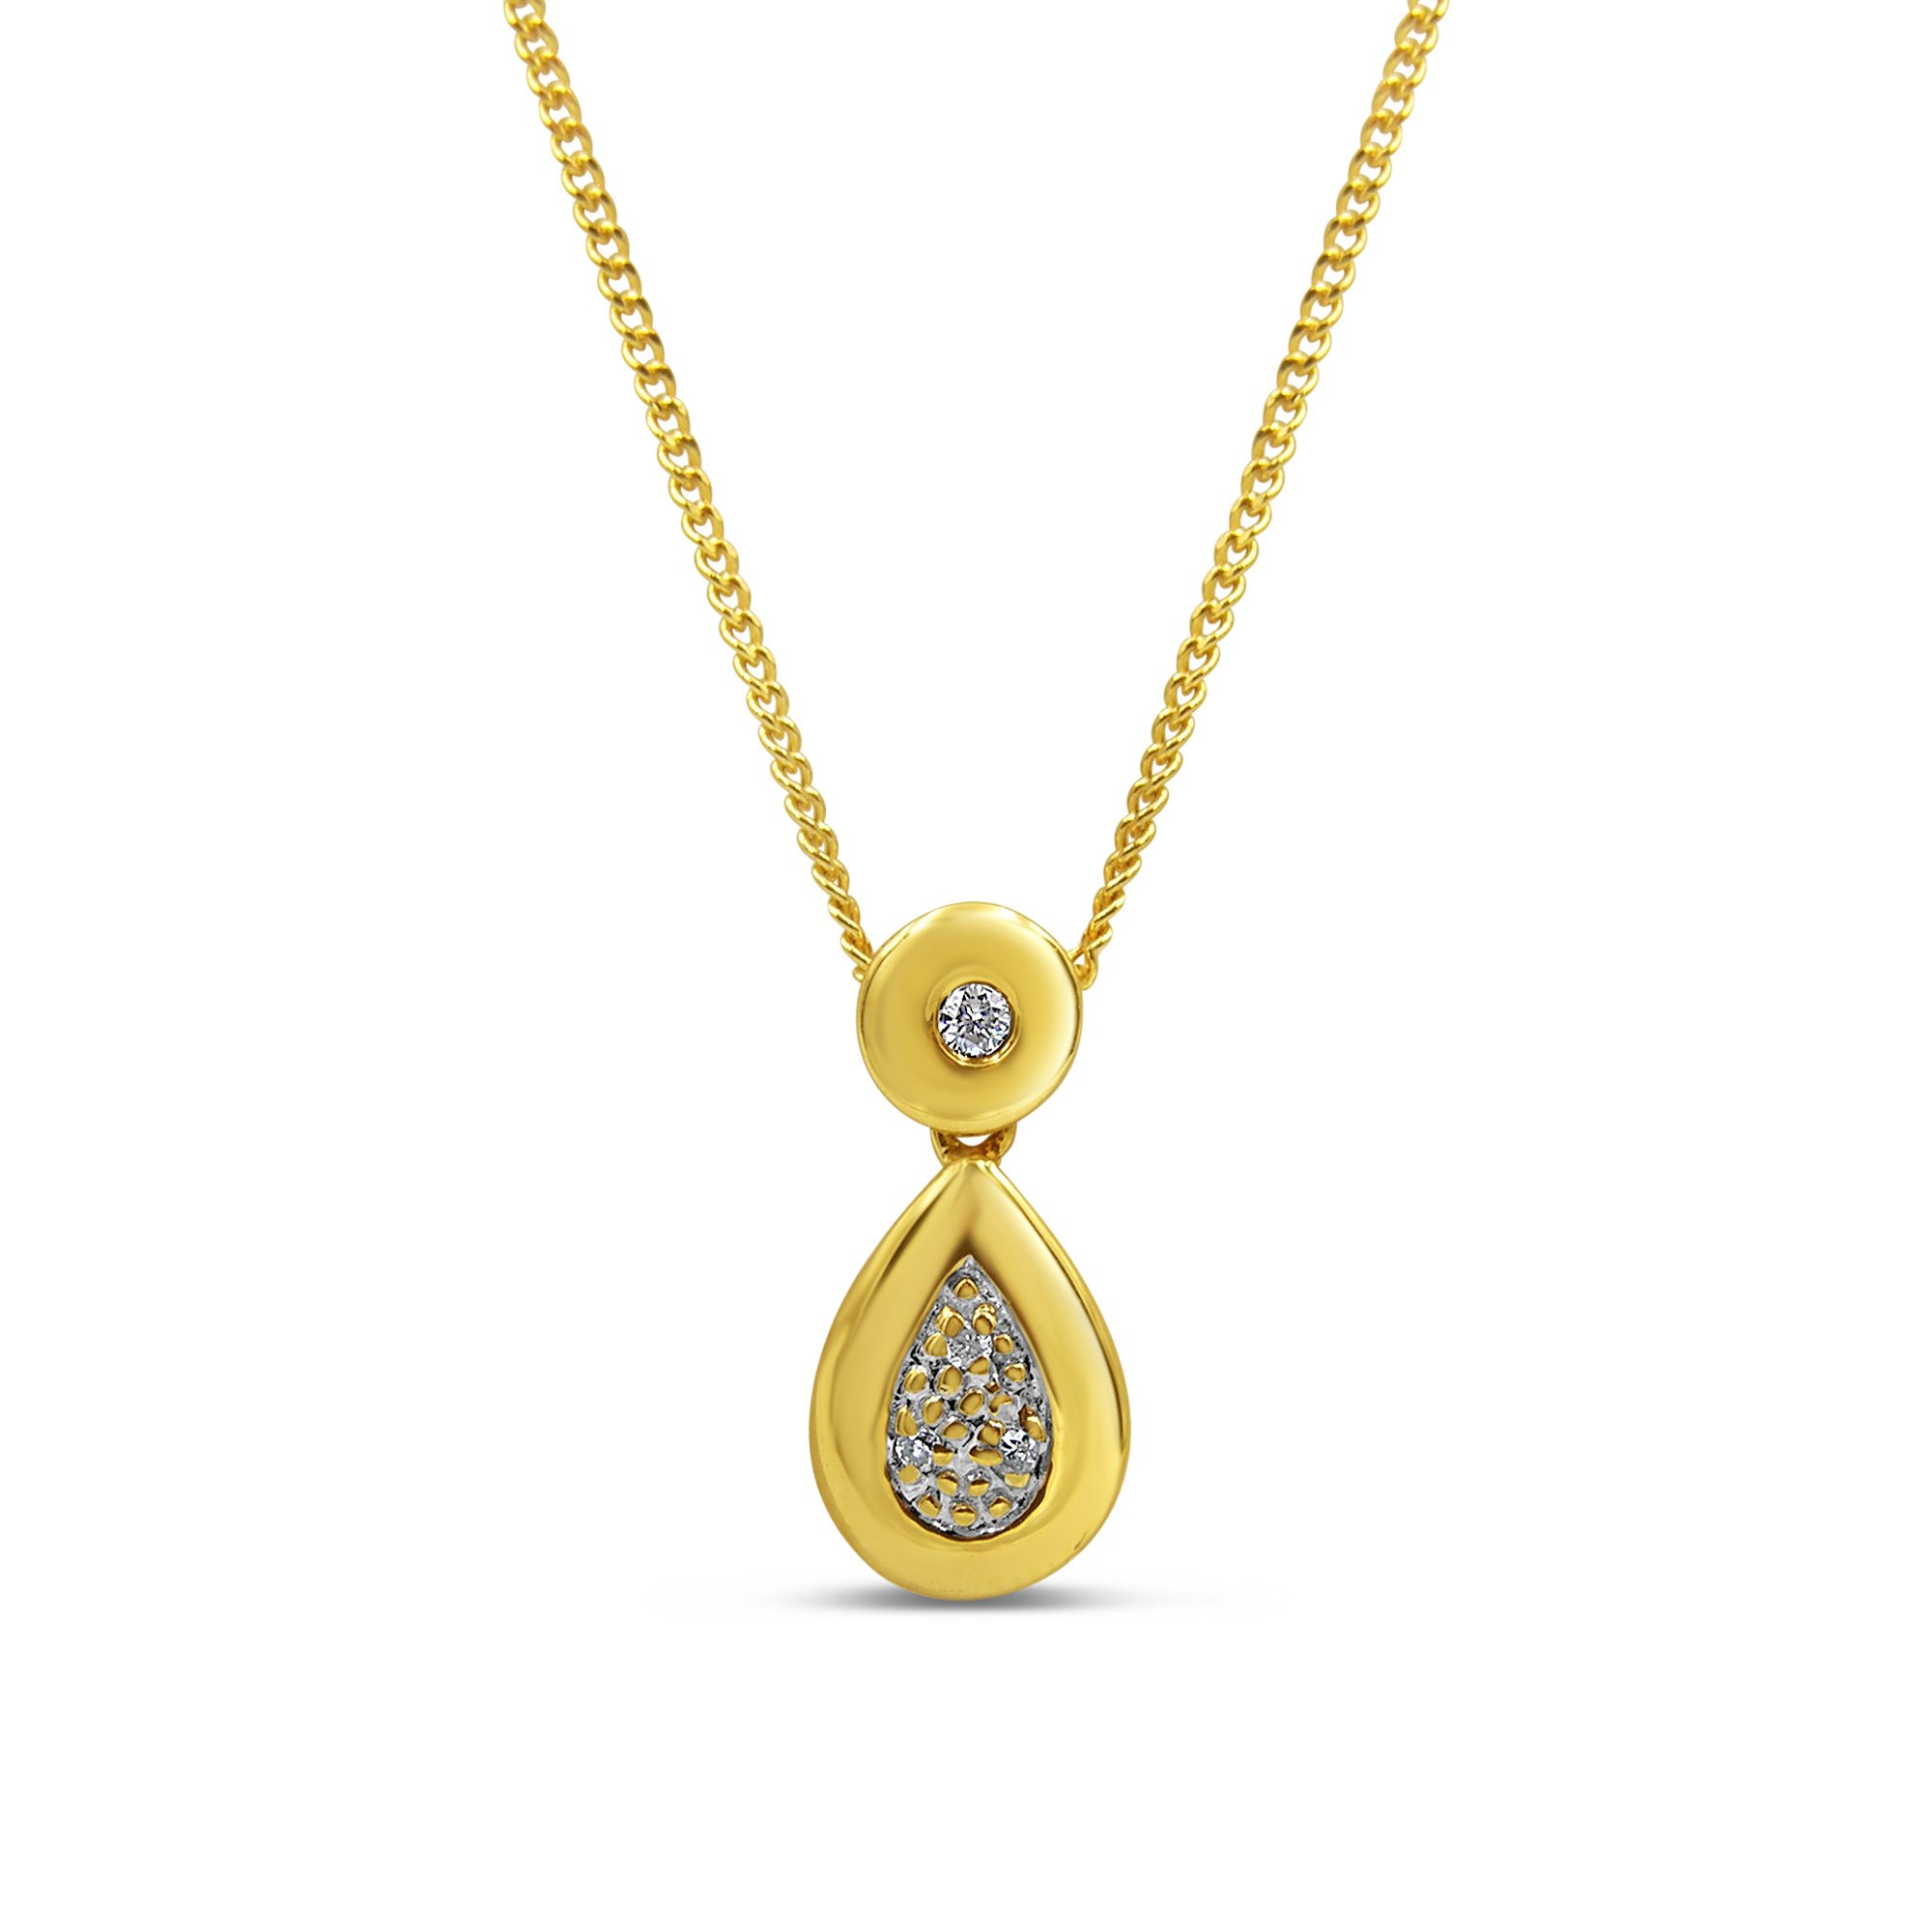 18kt yellow gold pendant with 0.05 ct diamonds